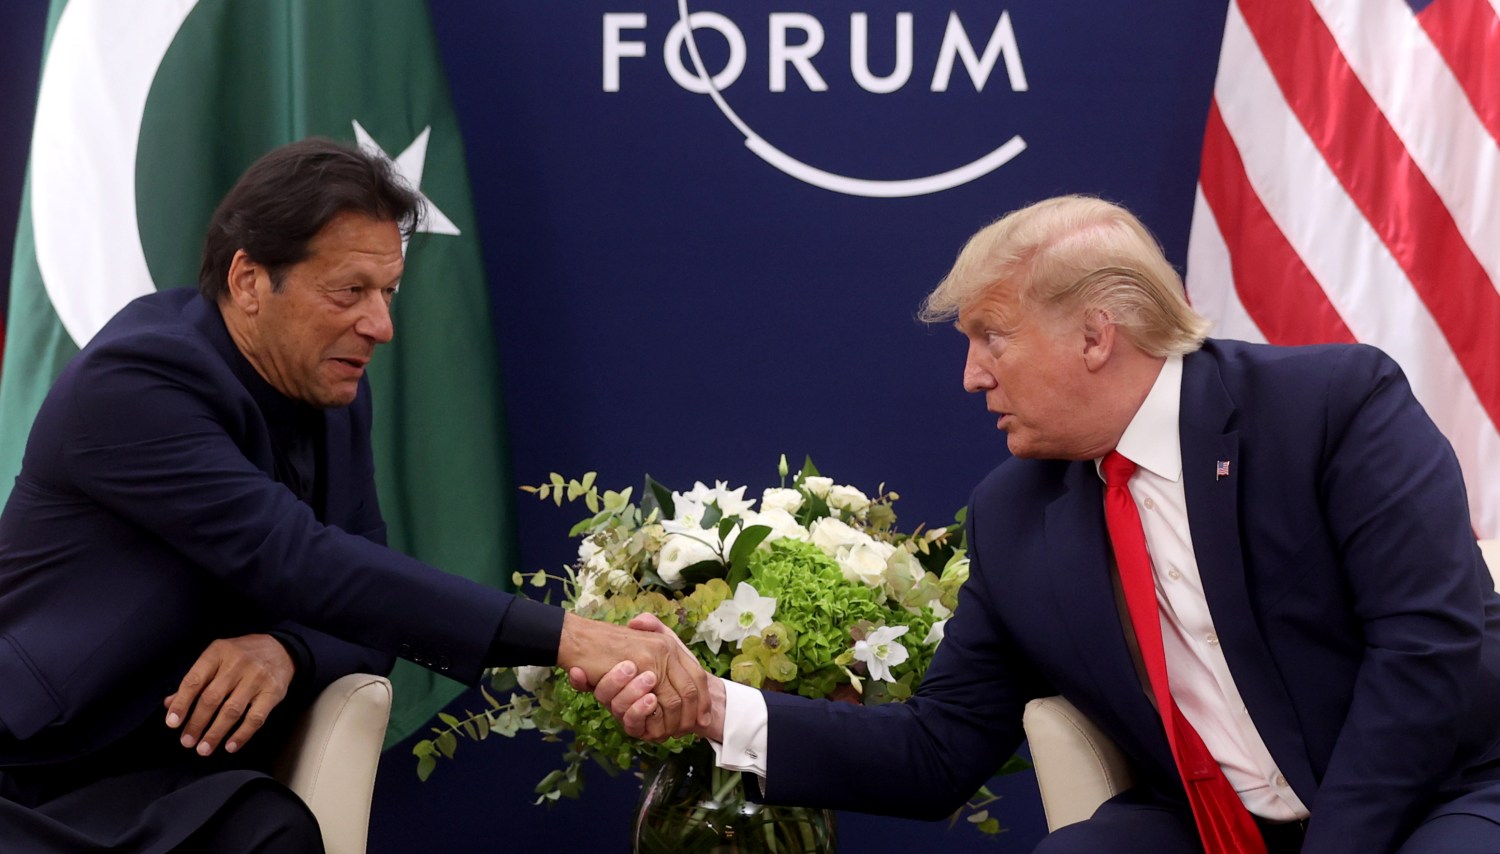 U.S. President Donald Trump shakes hands with Pakistan's Prime Minister Imran Khan during a bilateral meeting at the 50th World Economic Forum (WEF) annual meeting in Davos, Switzerland, January 21, 2020. REUTERS/Jonathan Ernst